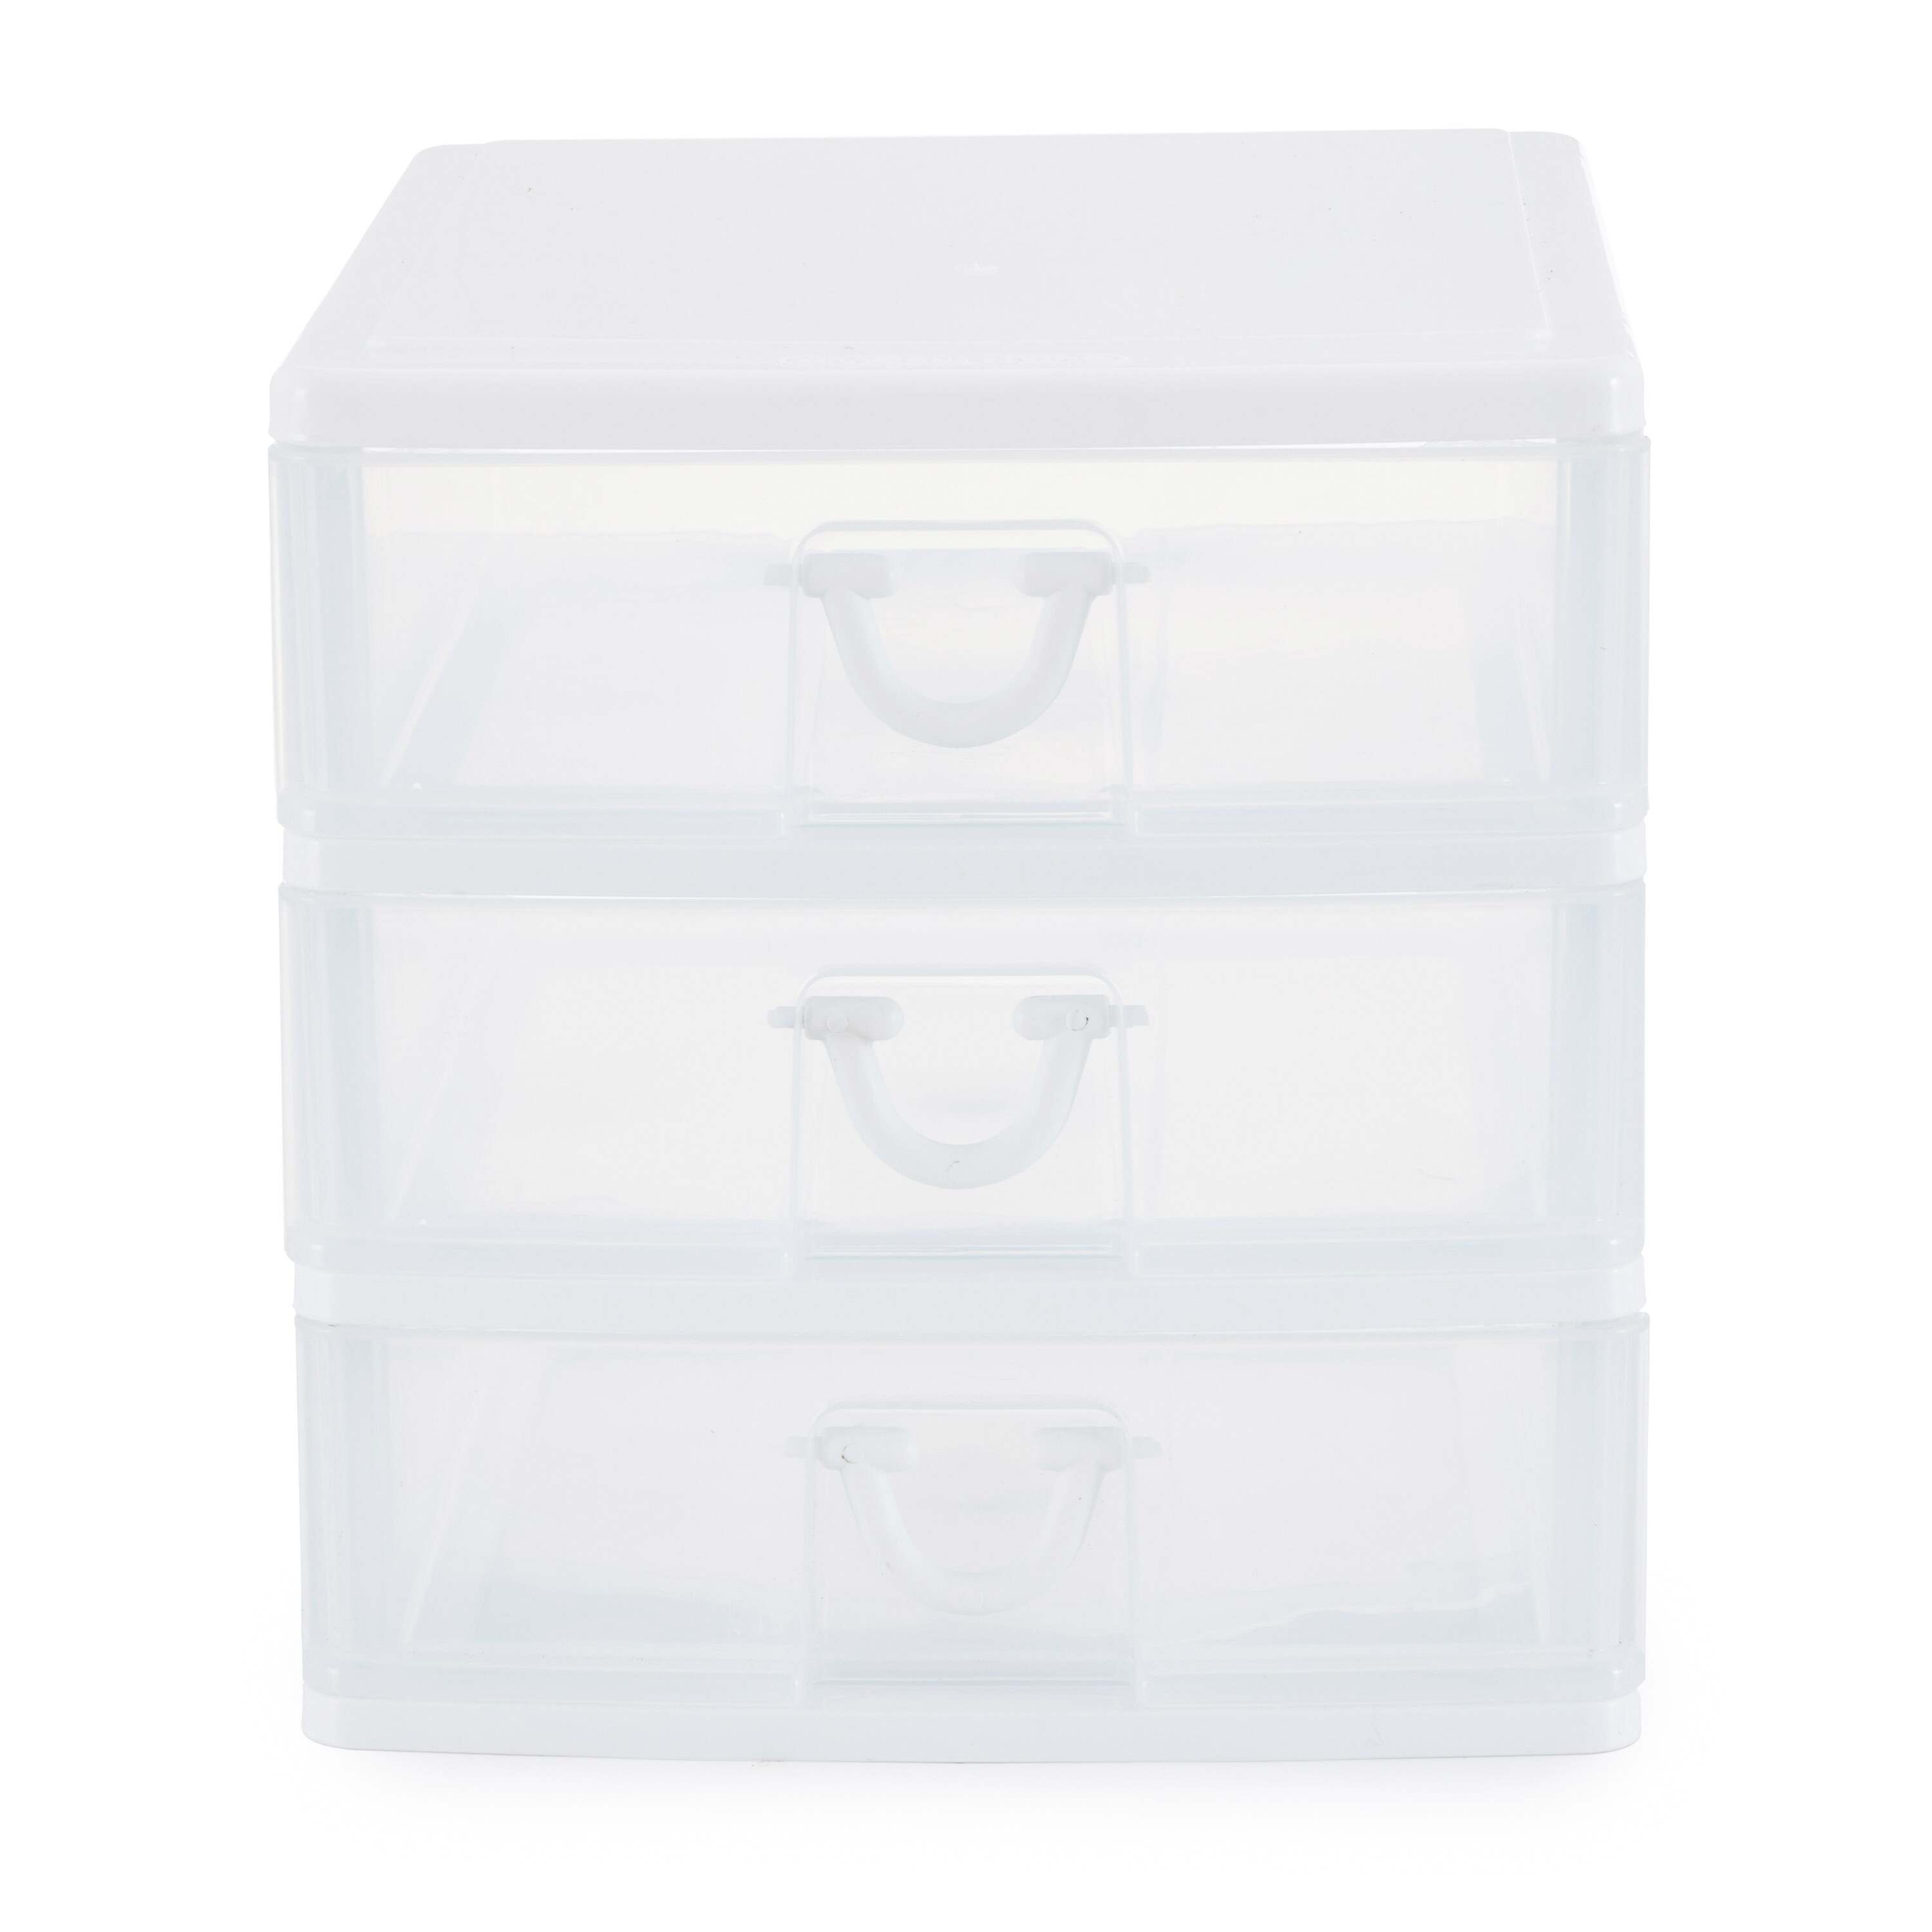 Gracious Living Resin Clear 4 Drawer Storage Chest Organization System with  Casters, White